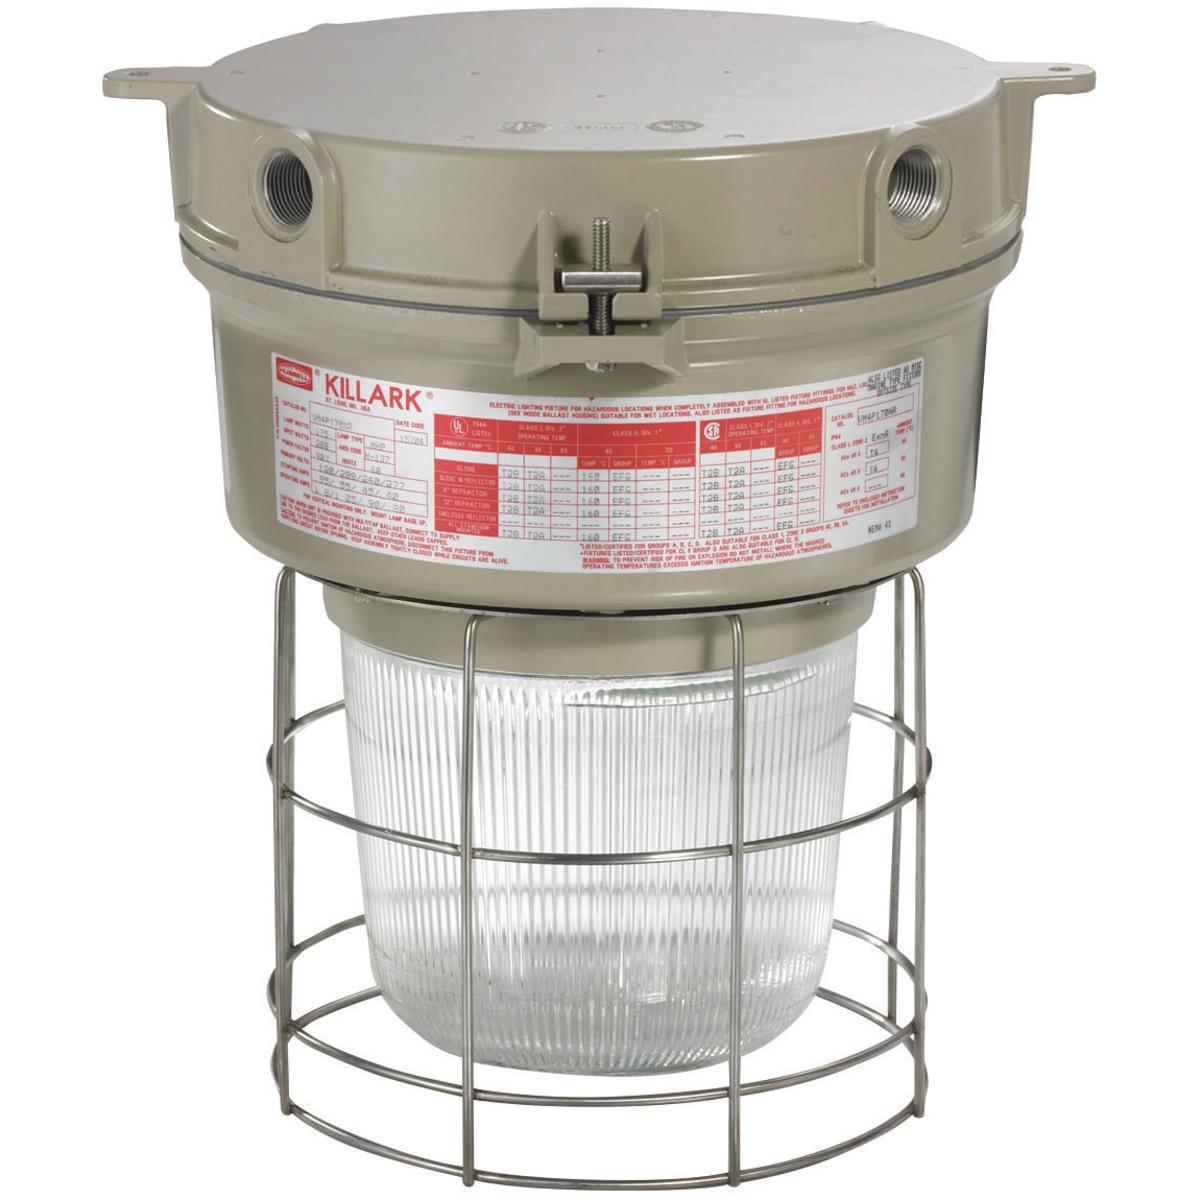 Hubbell VM4S050X2GLG VM4 Series - 50W High Pressure Sodium Quadri-Volt - 3/4" Ceiling Mount - Globe and Guard  ; Ballast tank and splice box – corrosion resistant copper-free aluminum alloy with baked powder epoxy/polyester finish, electrostatically applied for complete, unif